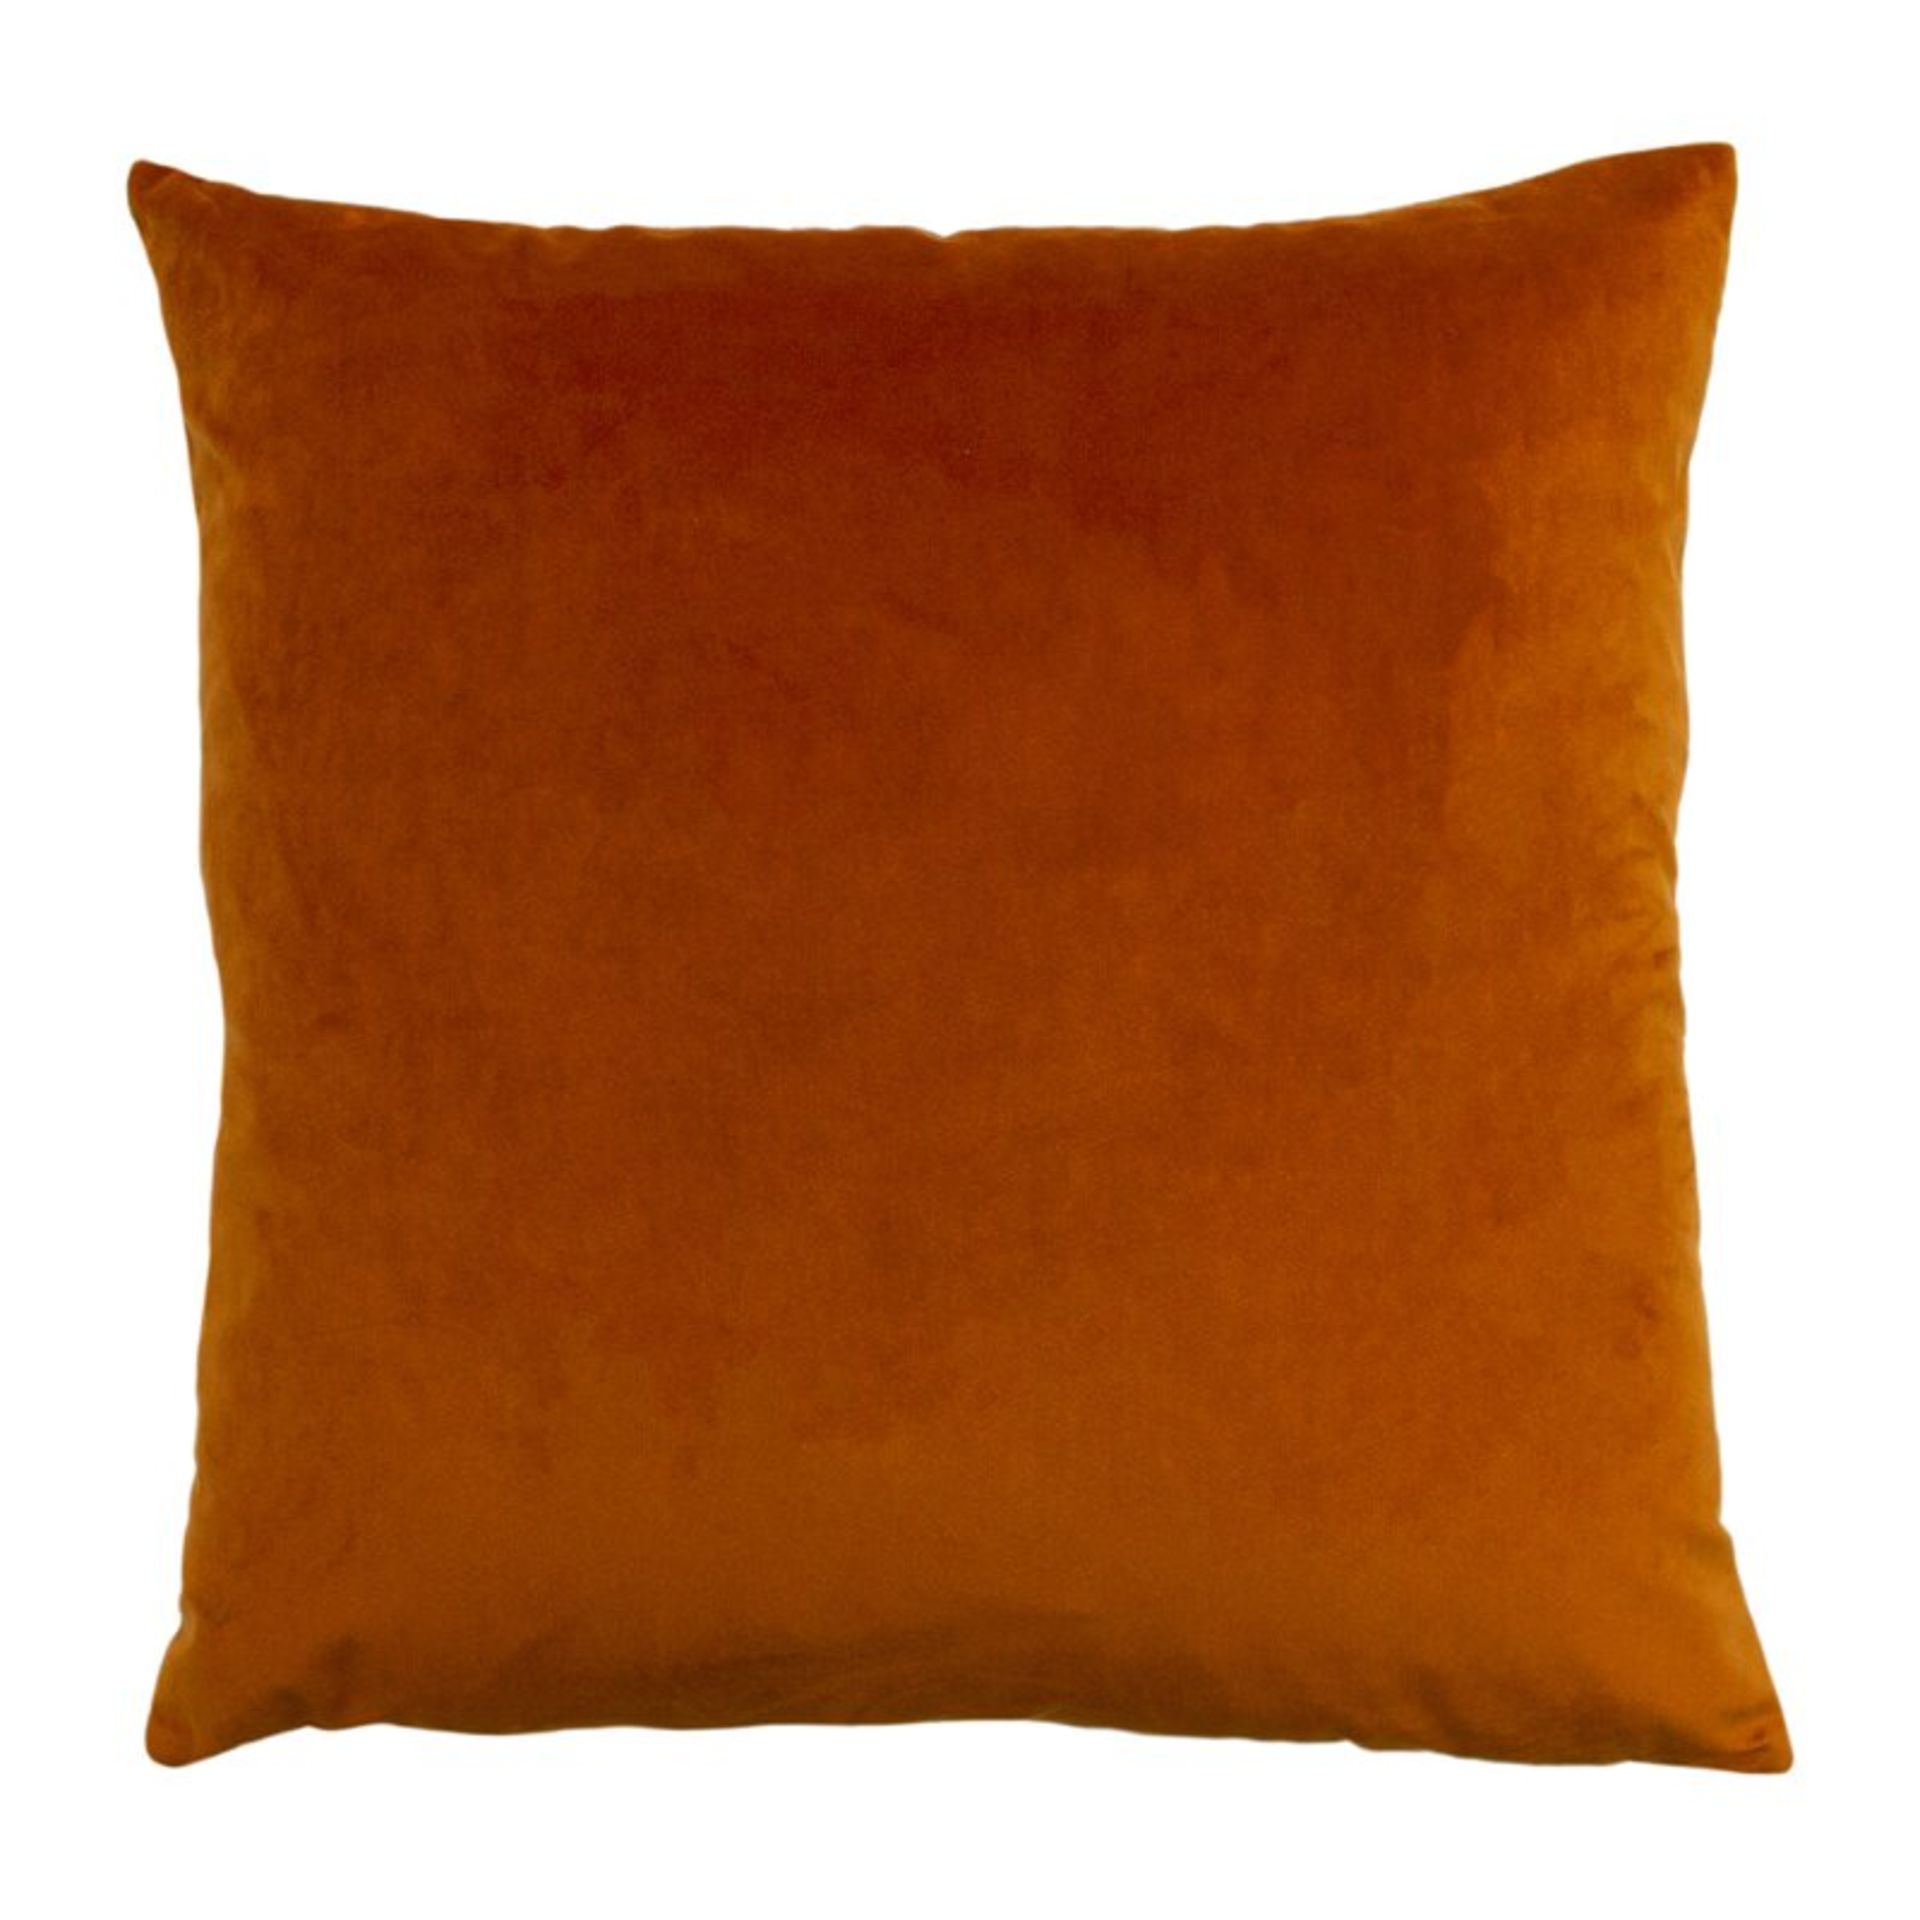 Eure Cushion Cover - RRP £14.99. - Image 3 of 4